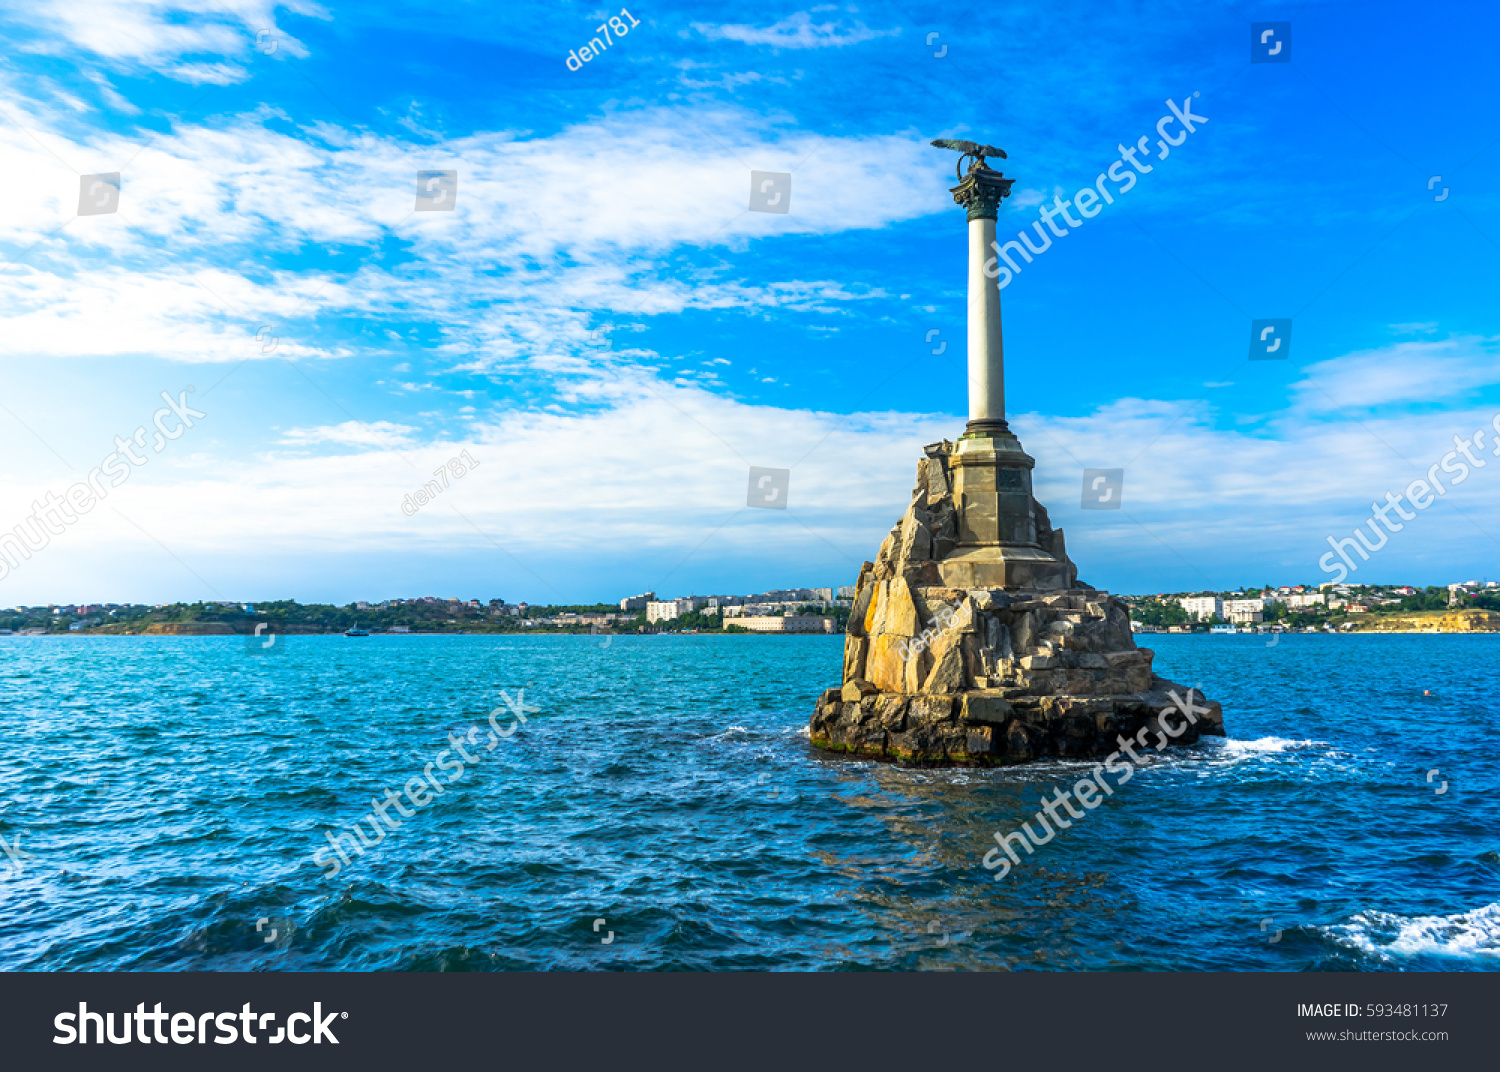 Monument to the Scuttled Ships in Sevastopol #593481137